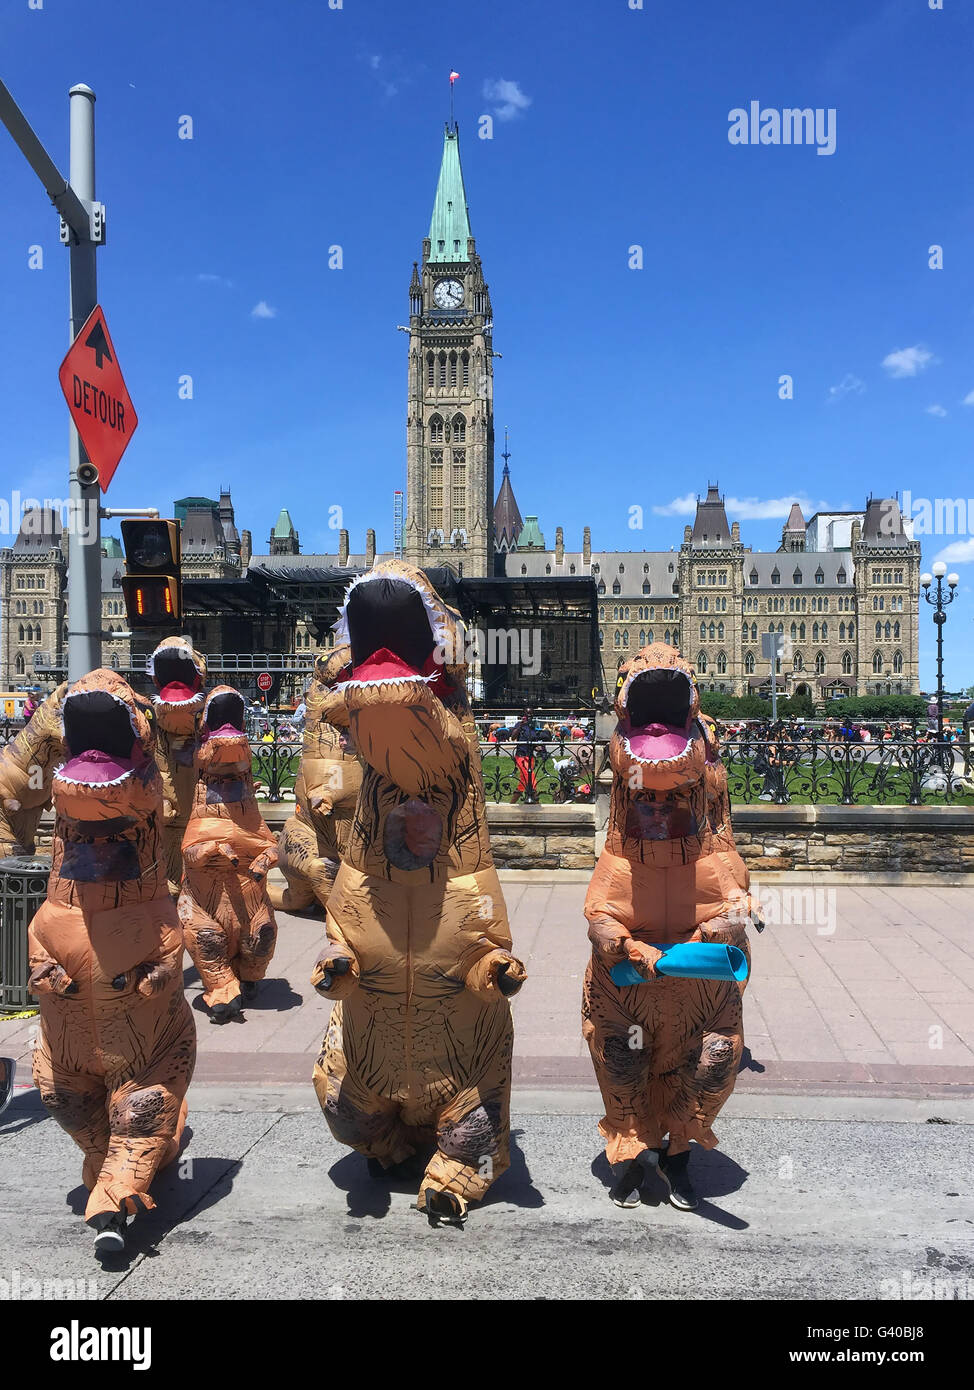 Ottawa, Canada - June 15, 2016:  People dressed as dinosaurs visited Parliament Hill in order to promote a Dinosaur exhibit Stock Photo